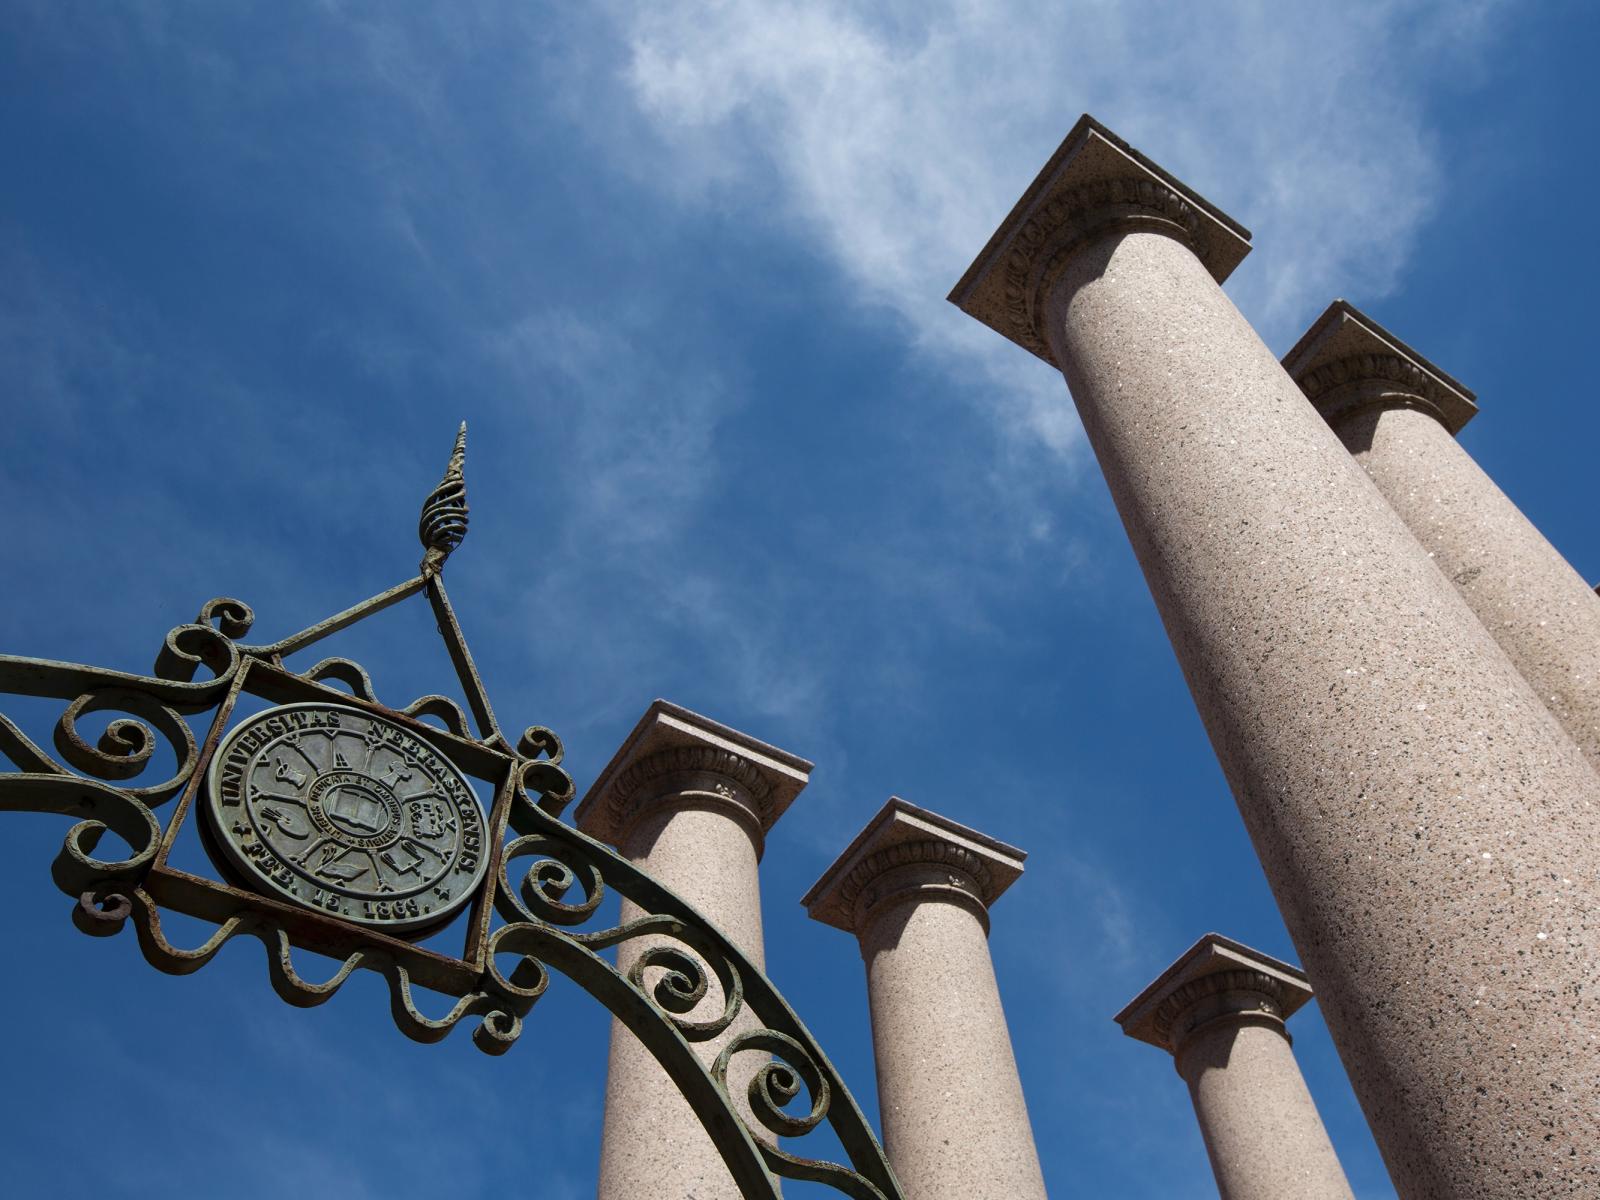 Granite columns and blue sky on campus.